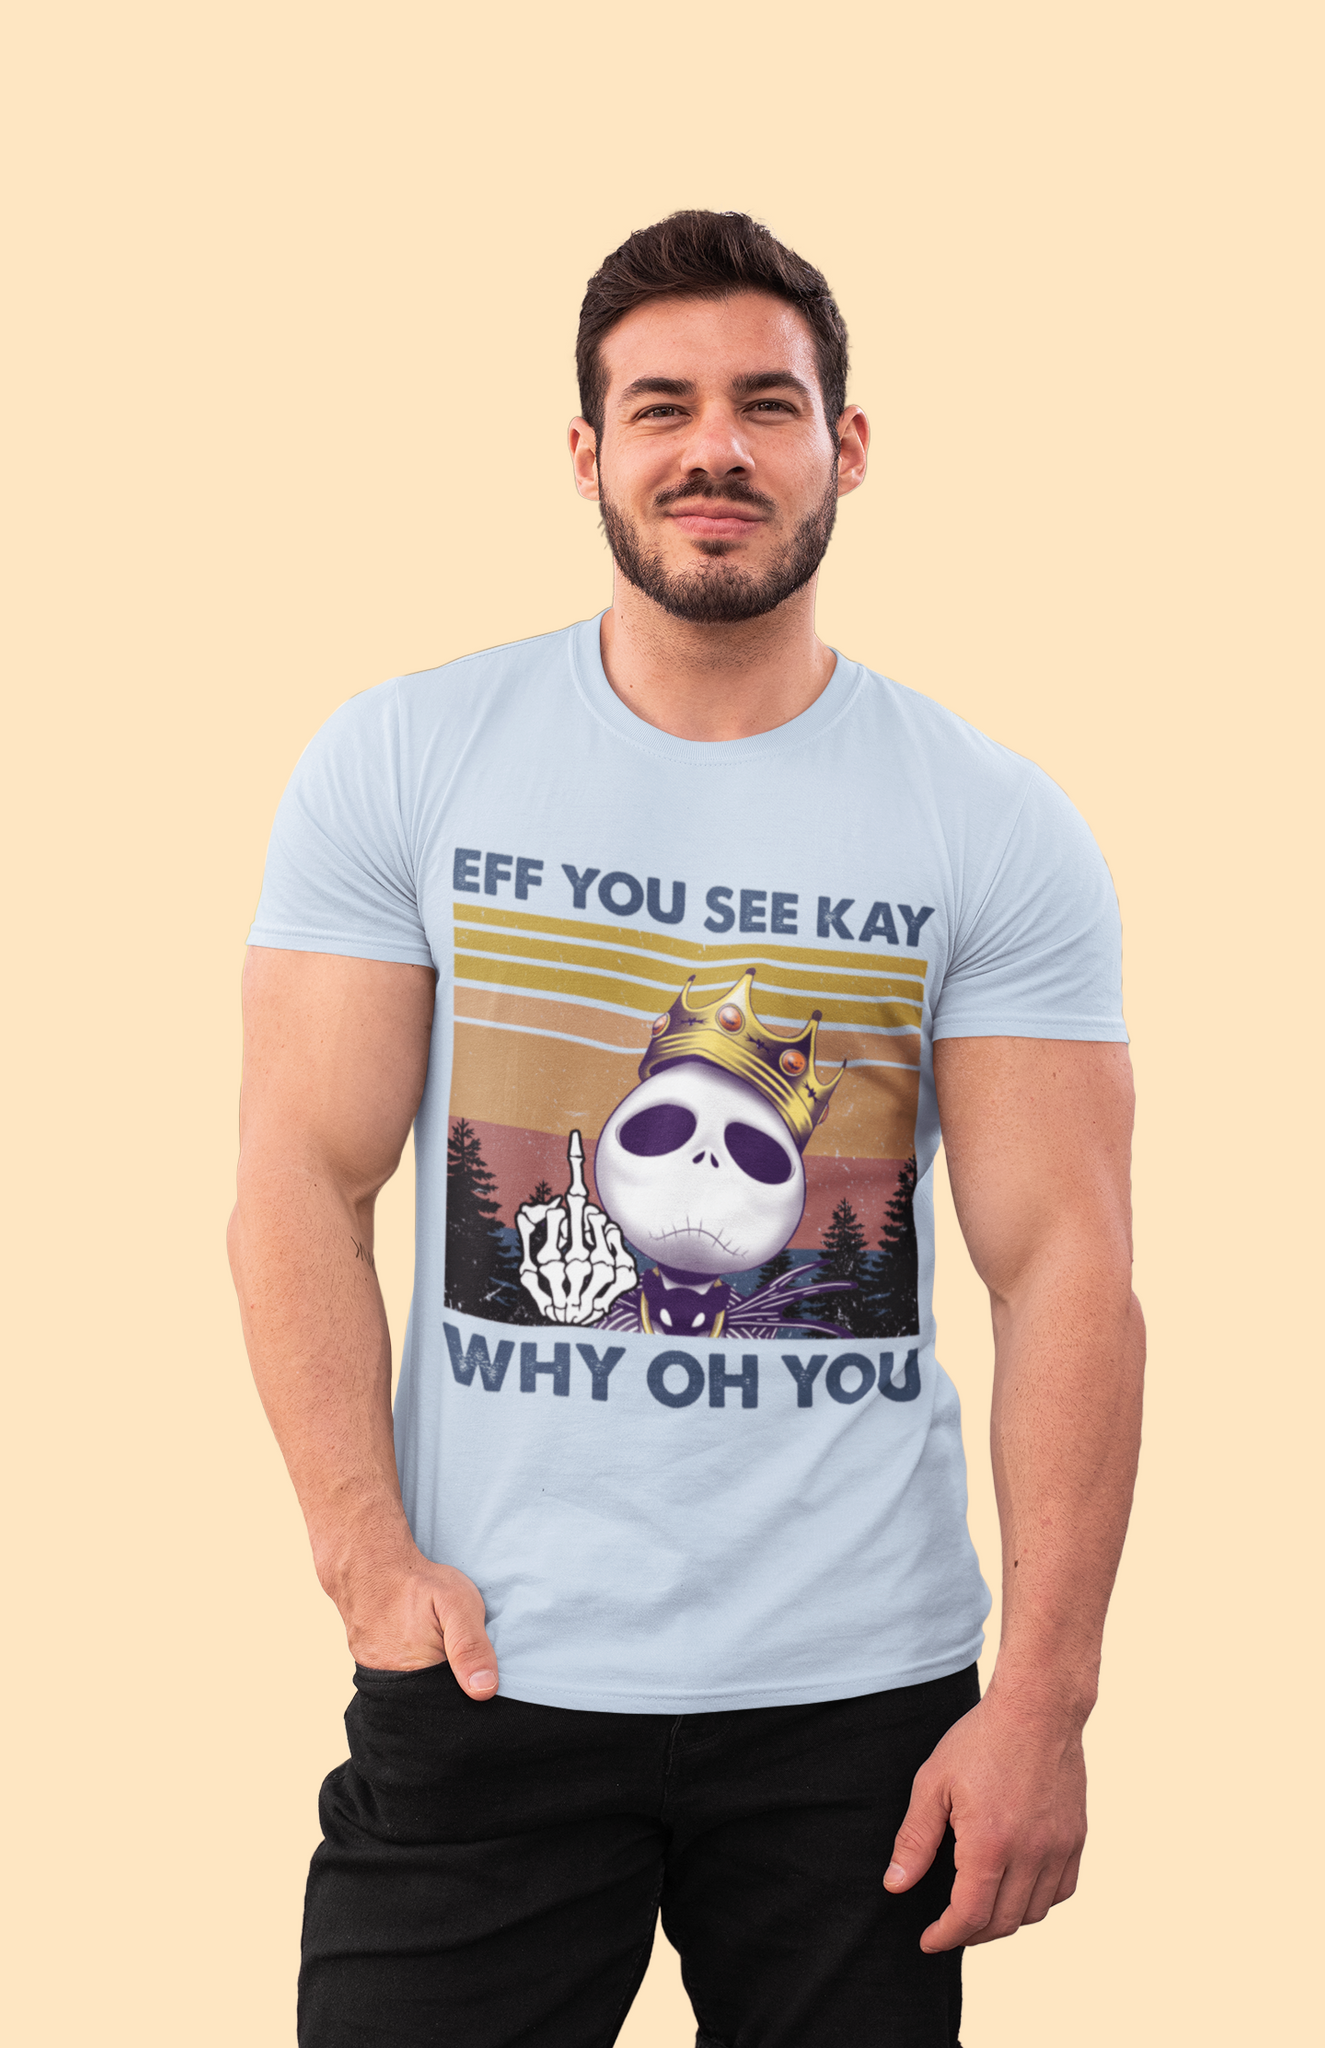 Nightmare Before Christmas Vintage T Shirt, Jack Skellington T Shirt, Eff You See Kay Why Oh You Tshirt, Halloween Gifts